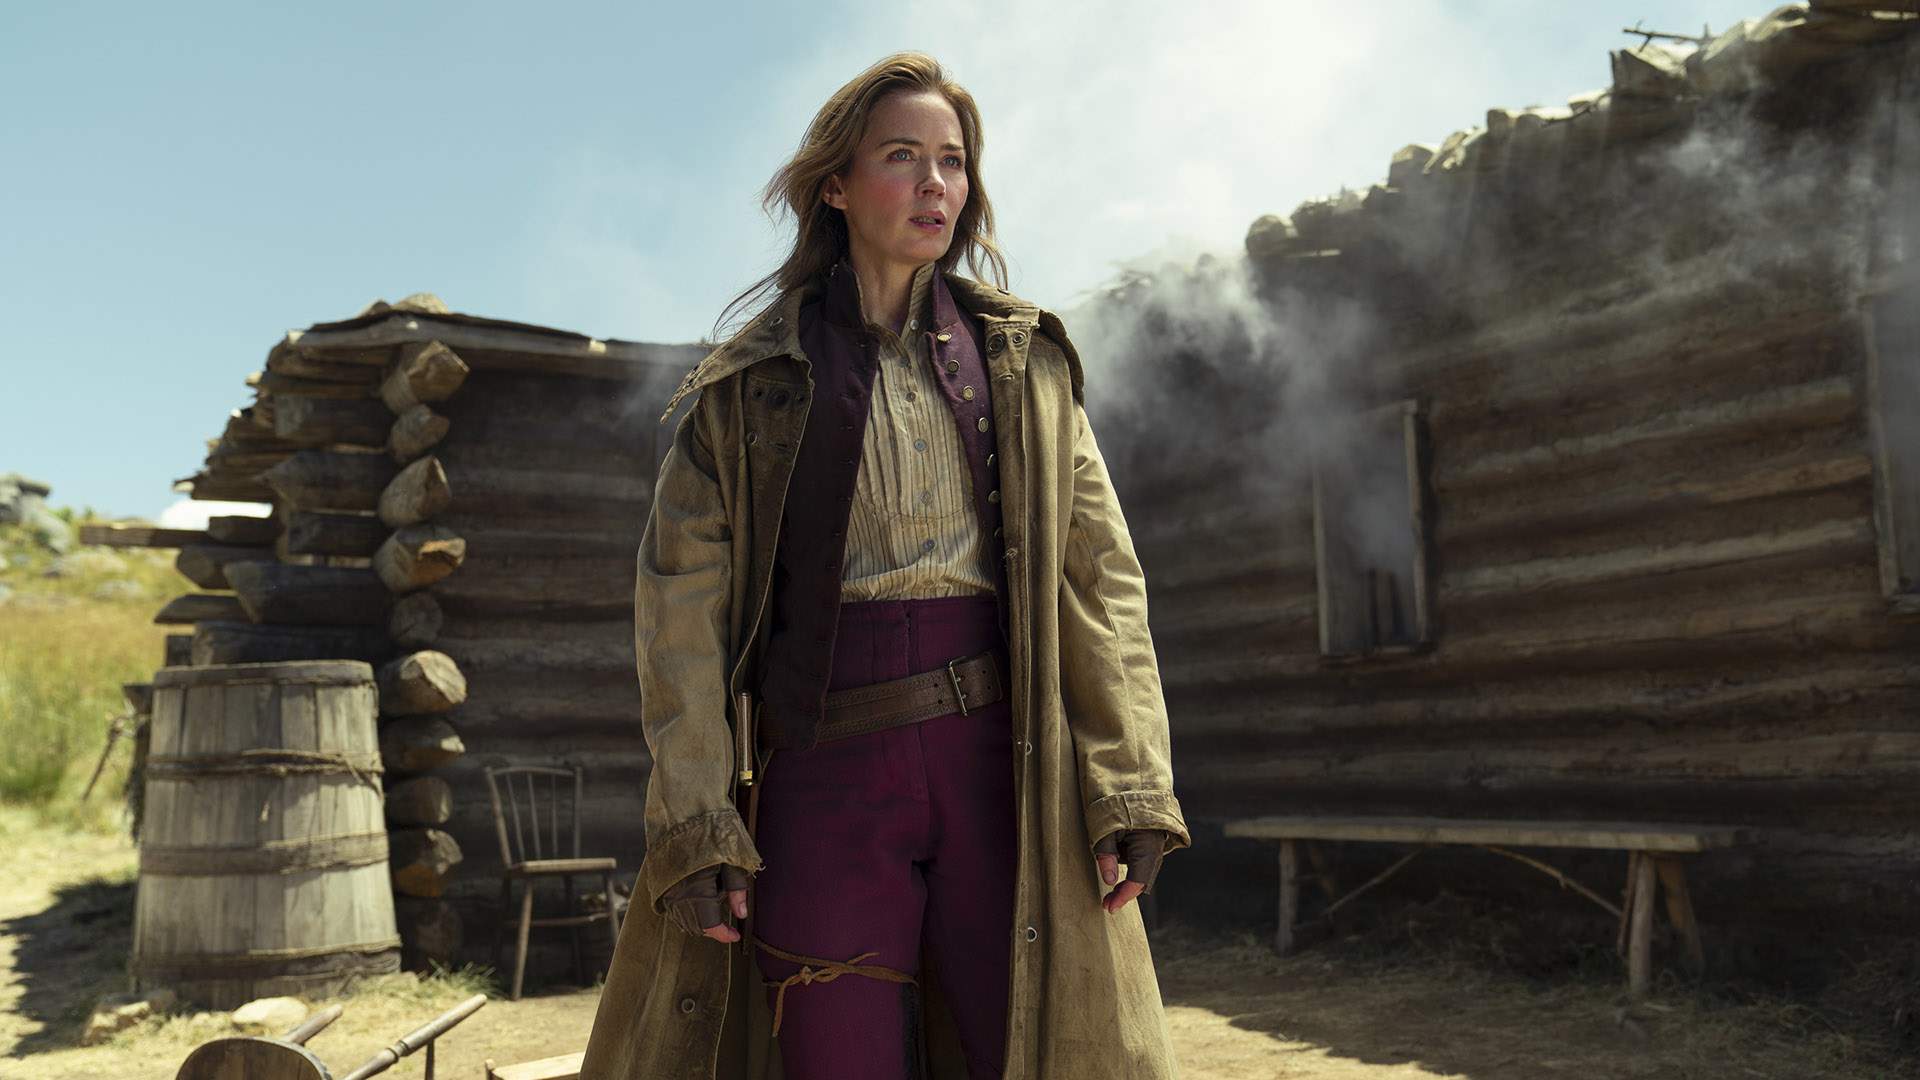 Emily Blunt Is Out for Revenge in the Trailer for Prime Video's Bloody New Western Series 'The English'